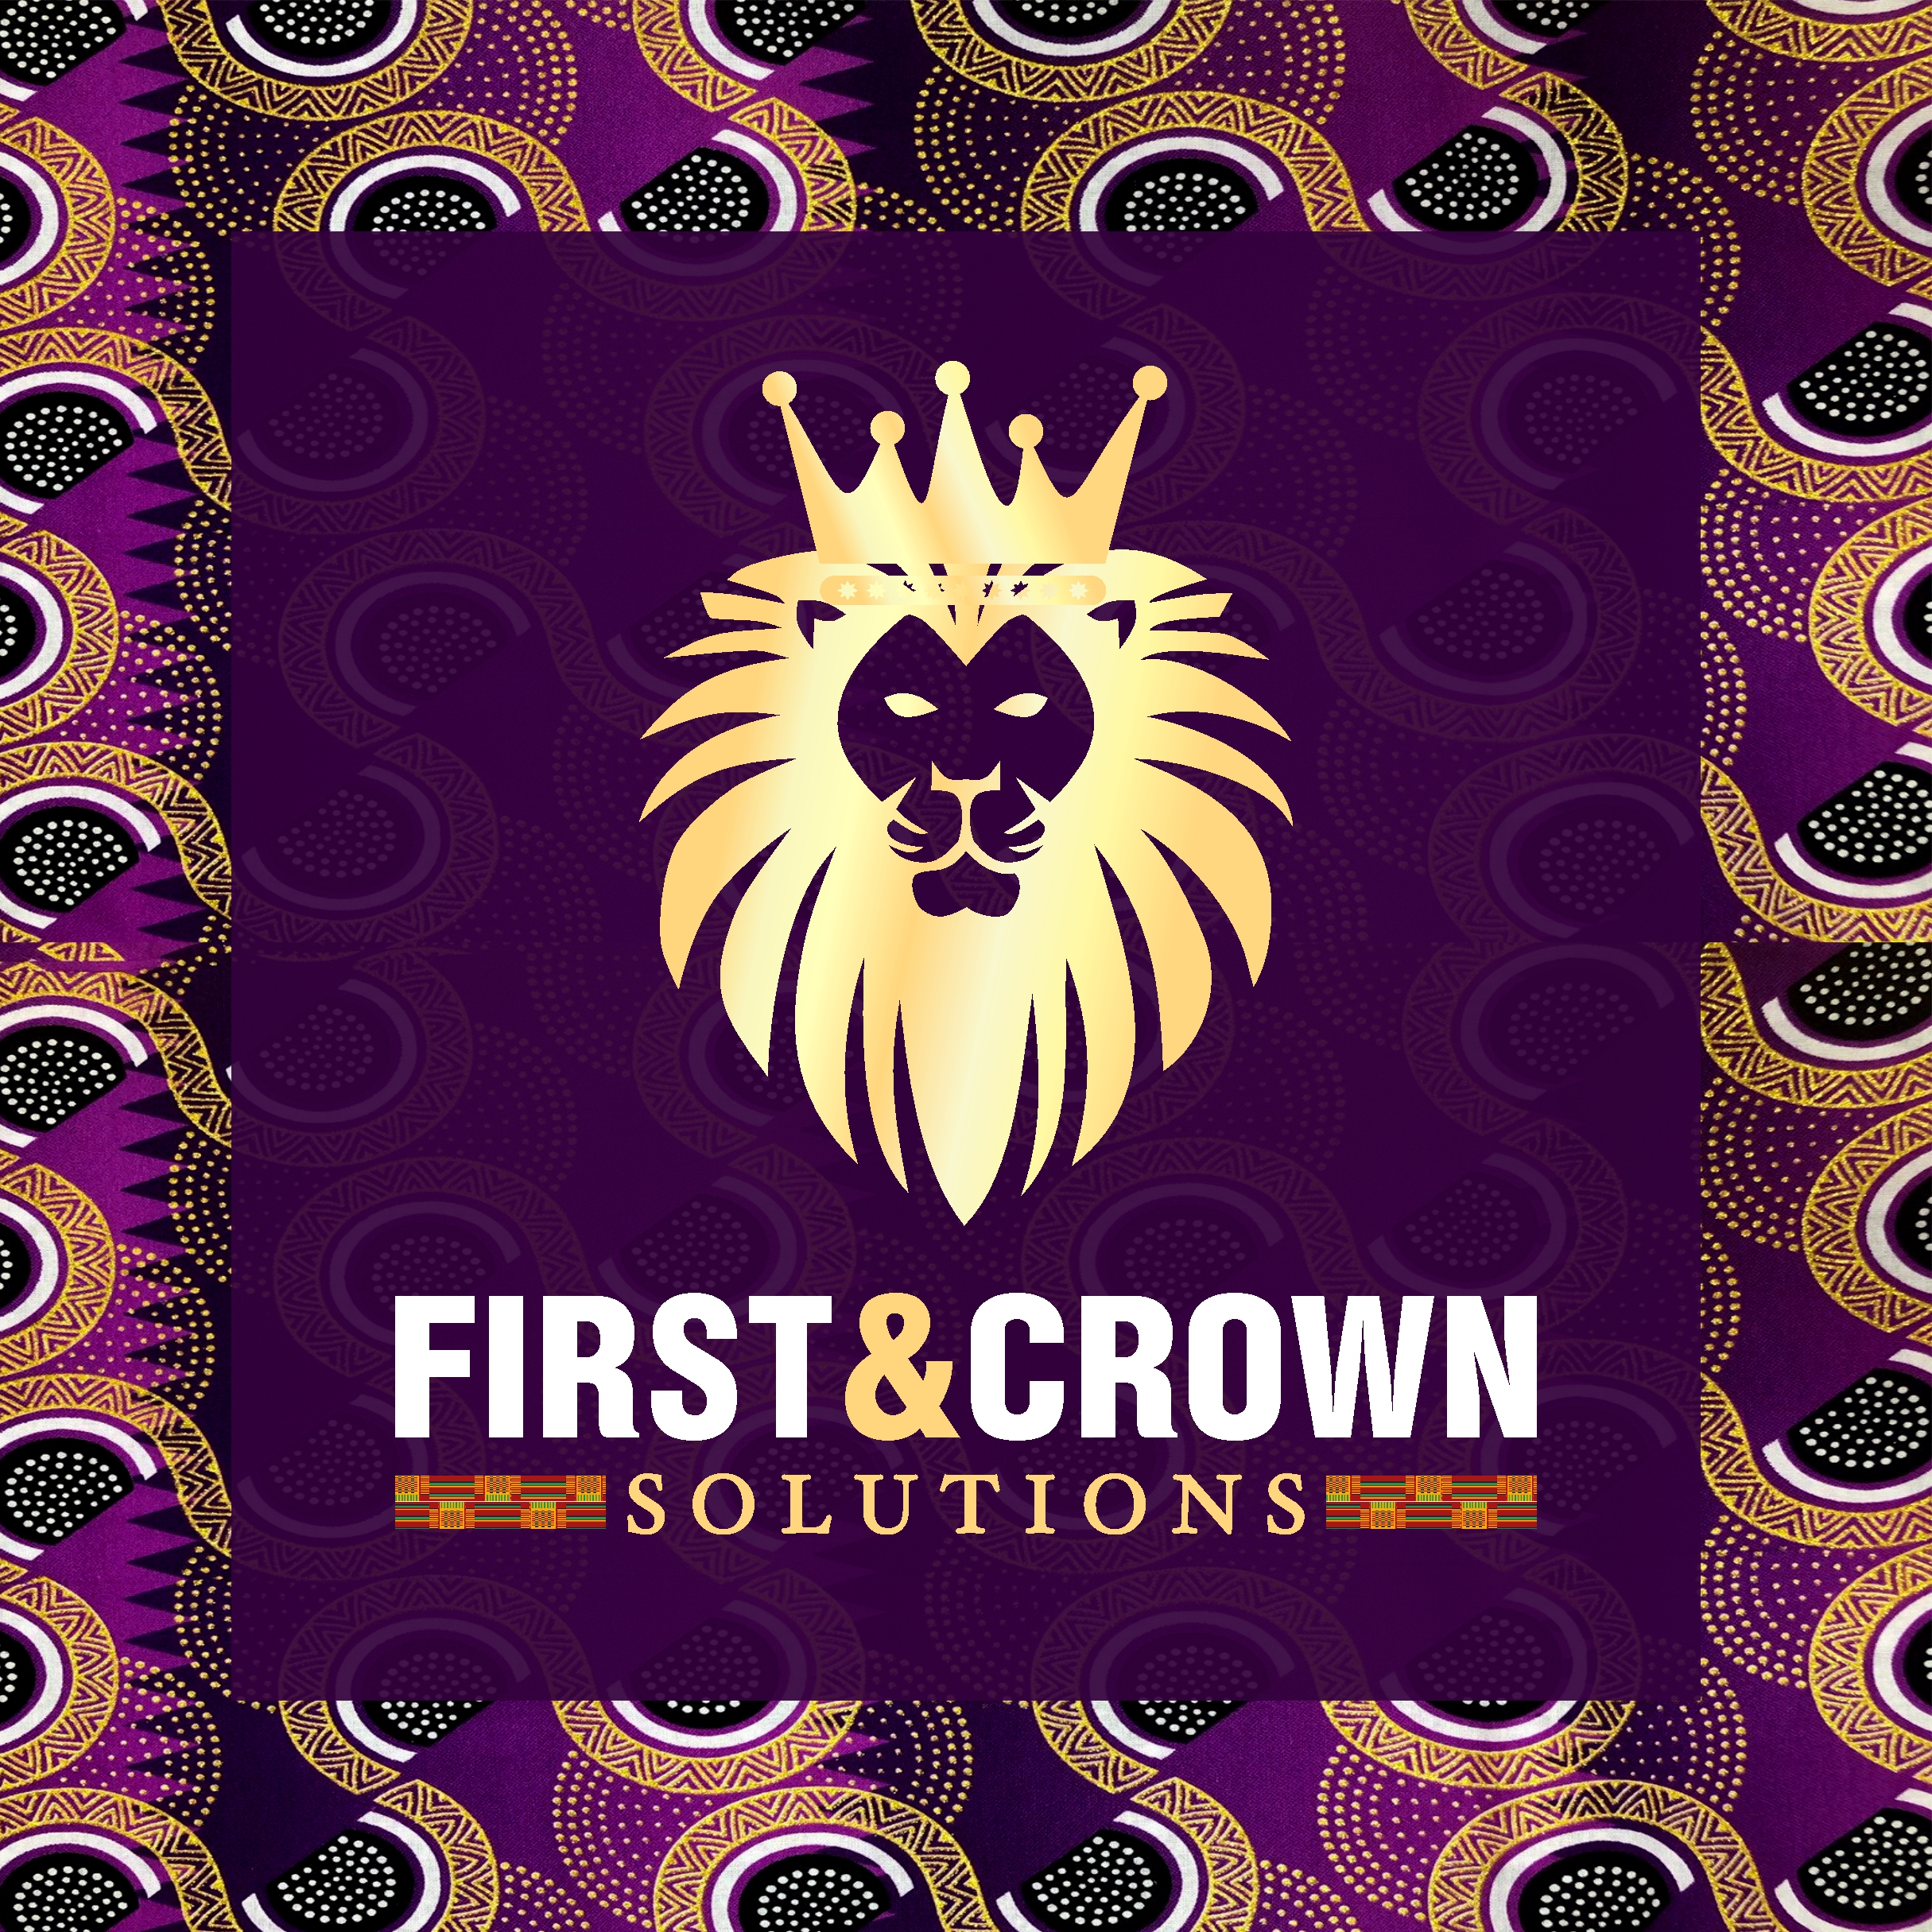 FIRST & CROWN SOLUTIONS, LLC